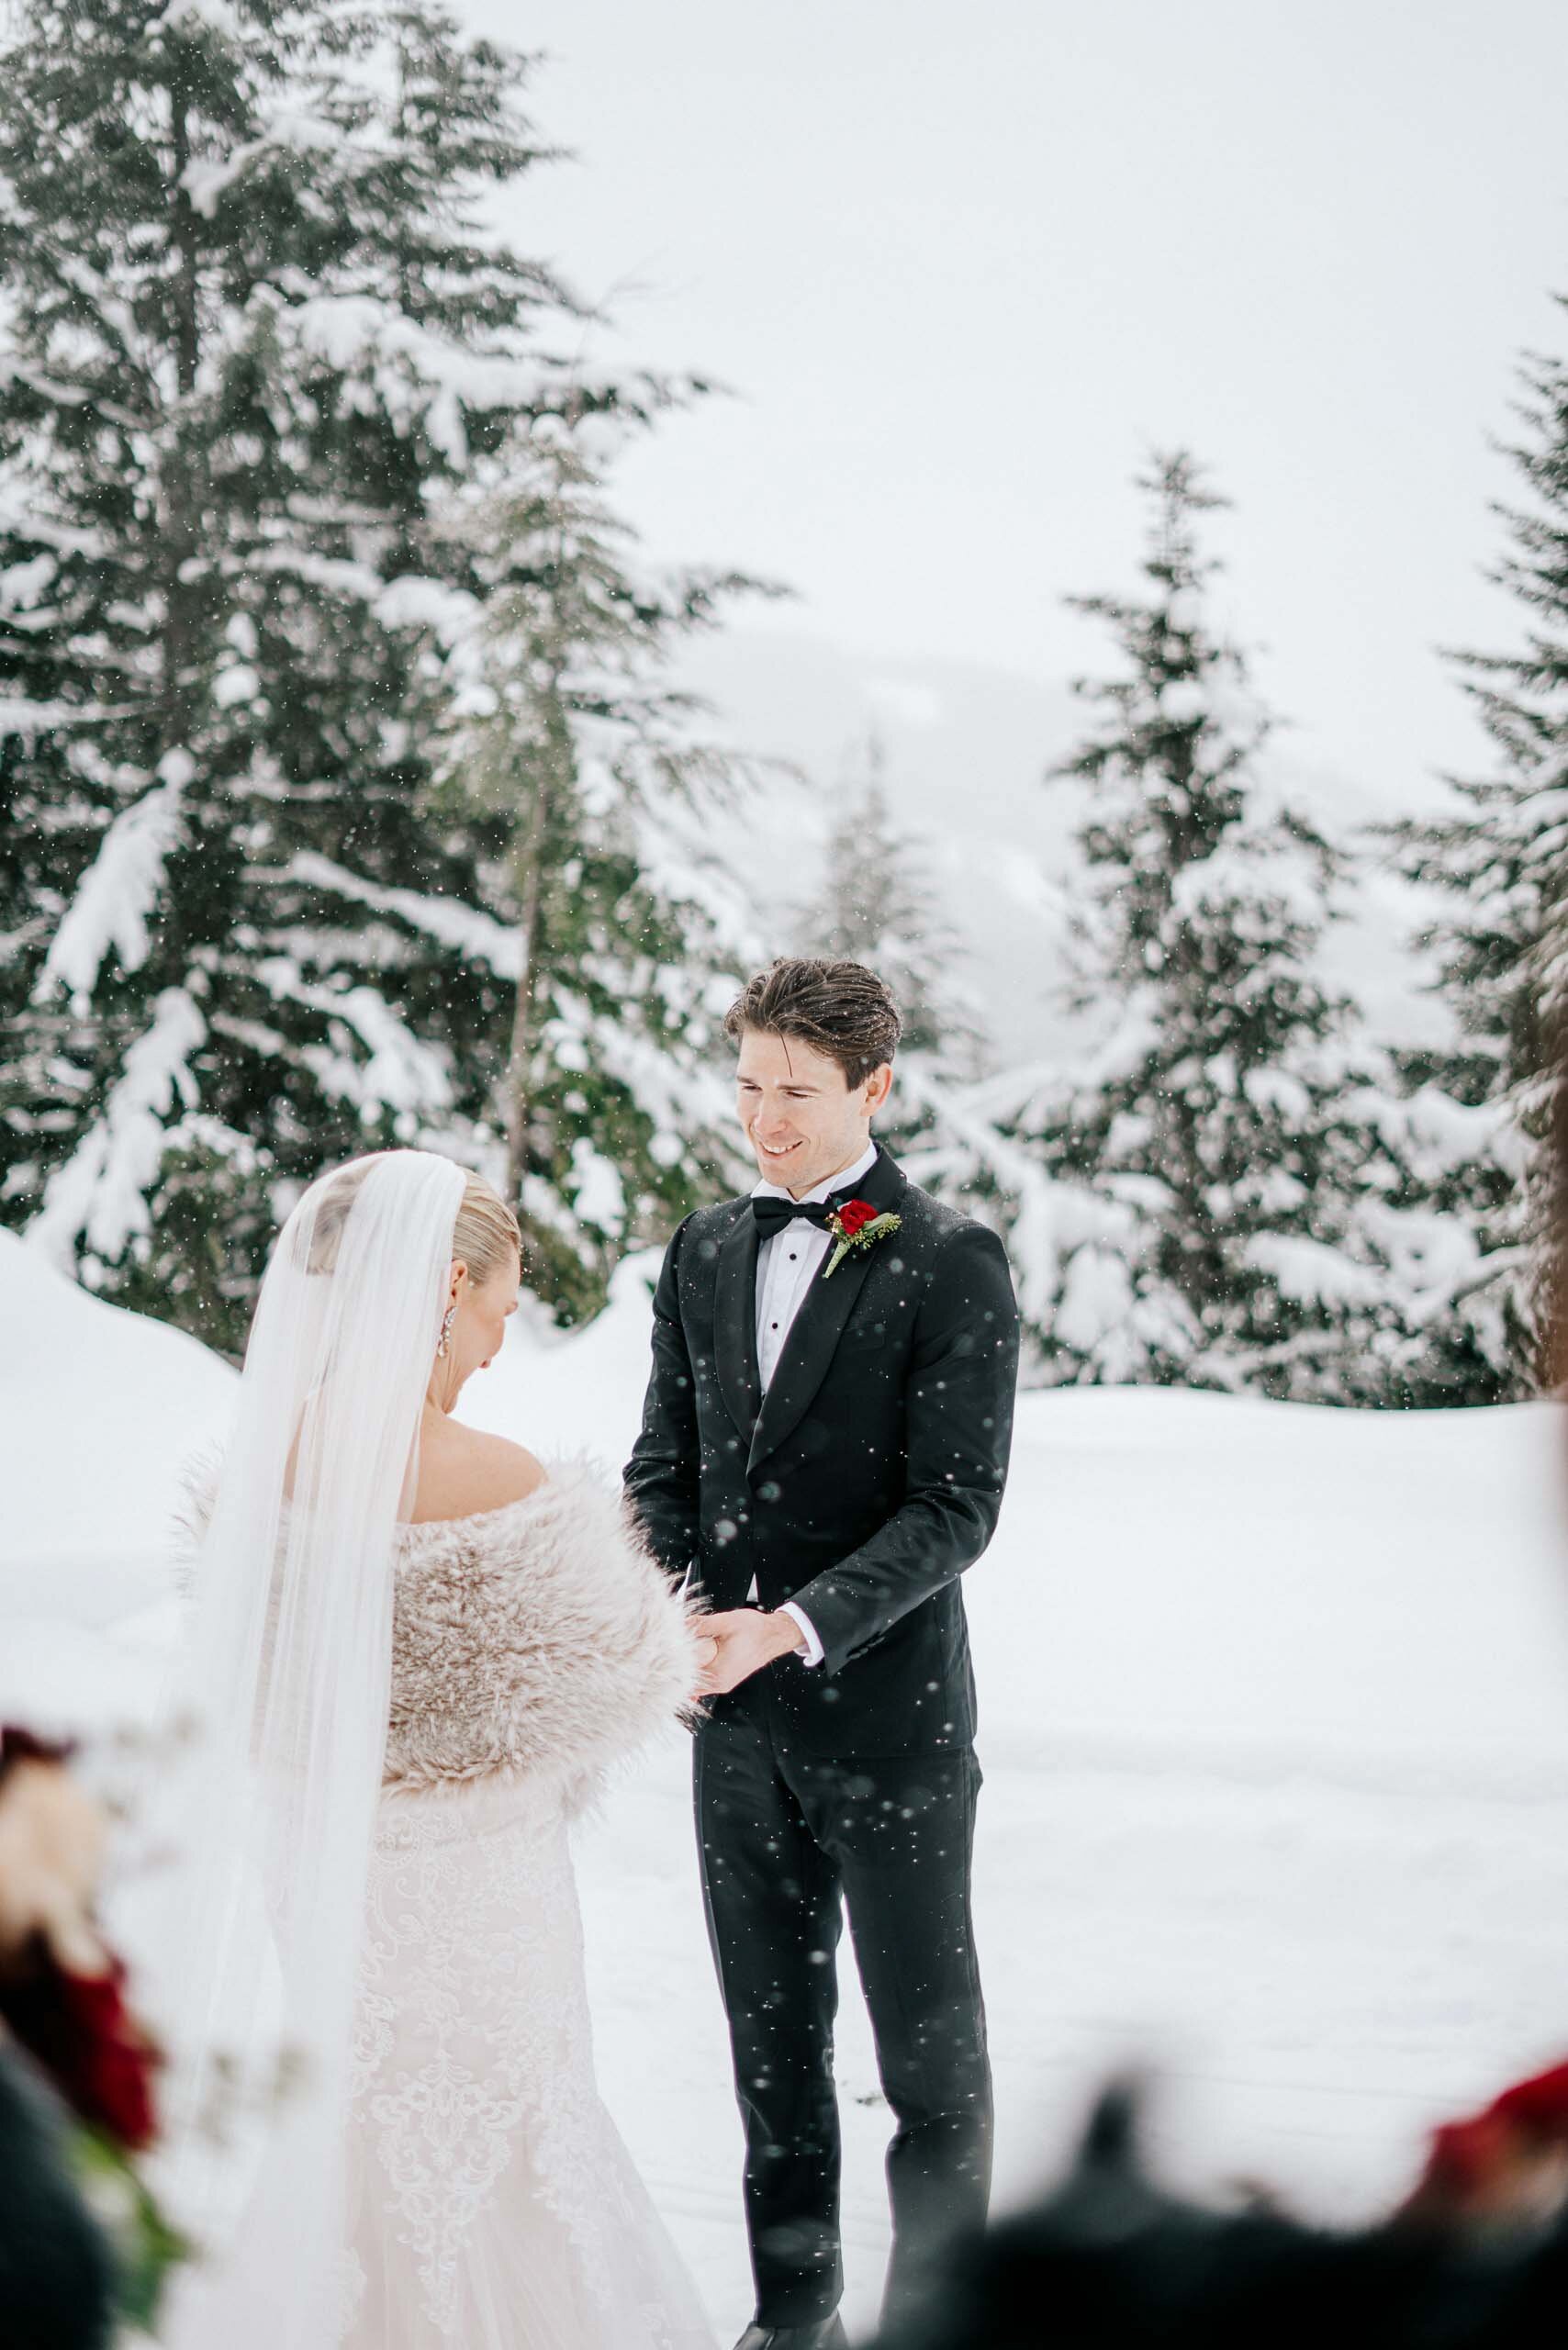 A bride and groom hold hands and smile during their ceremony as the snow falls in Whistler BC